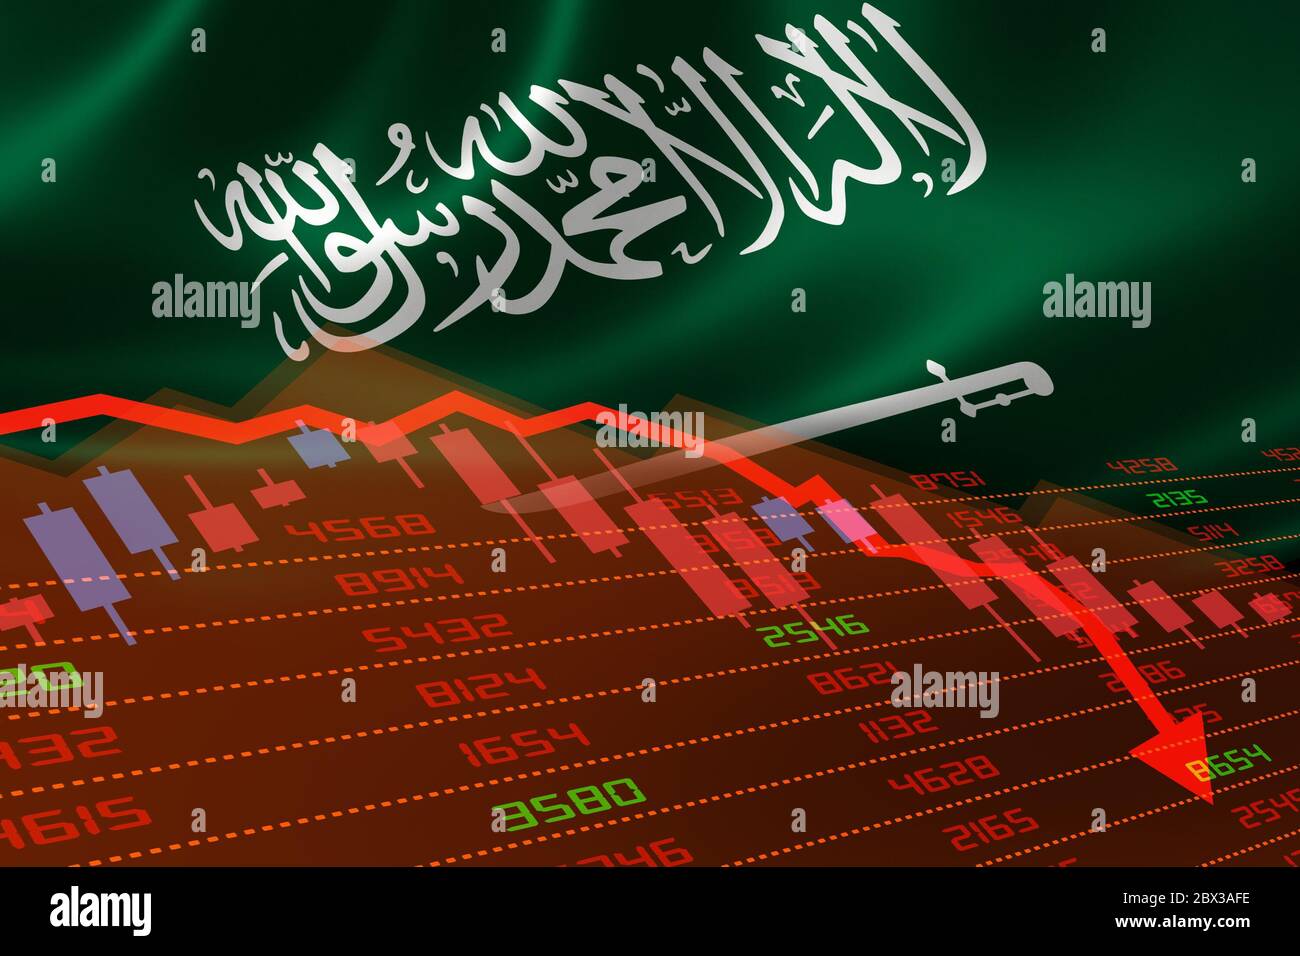 Saudi Arabia economic downturn with stock exchange market showing stock chart down and in red negative territory. Business and financial money market Stock Photo